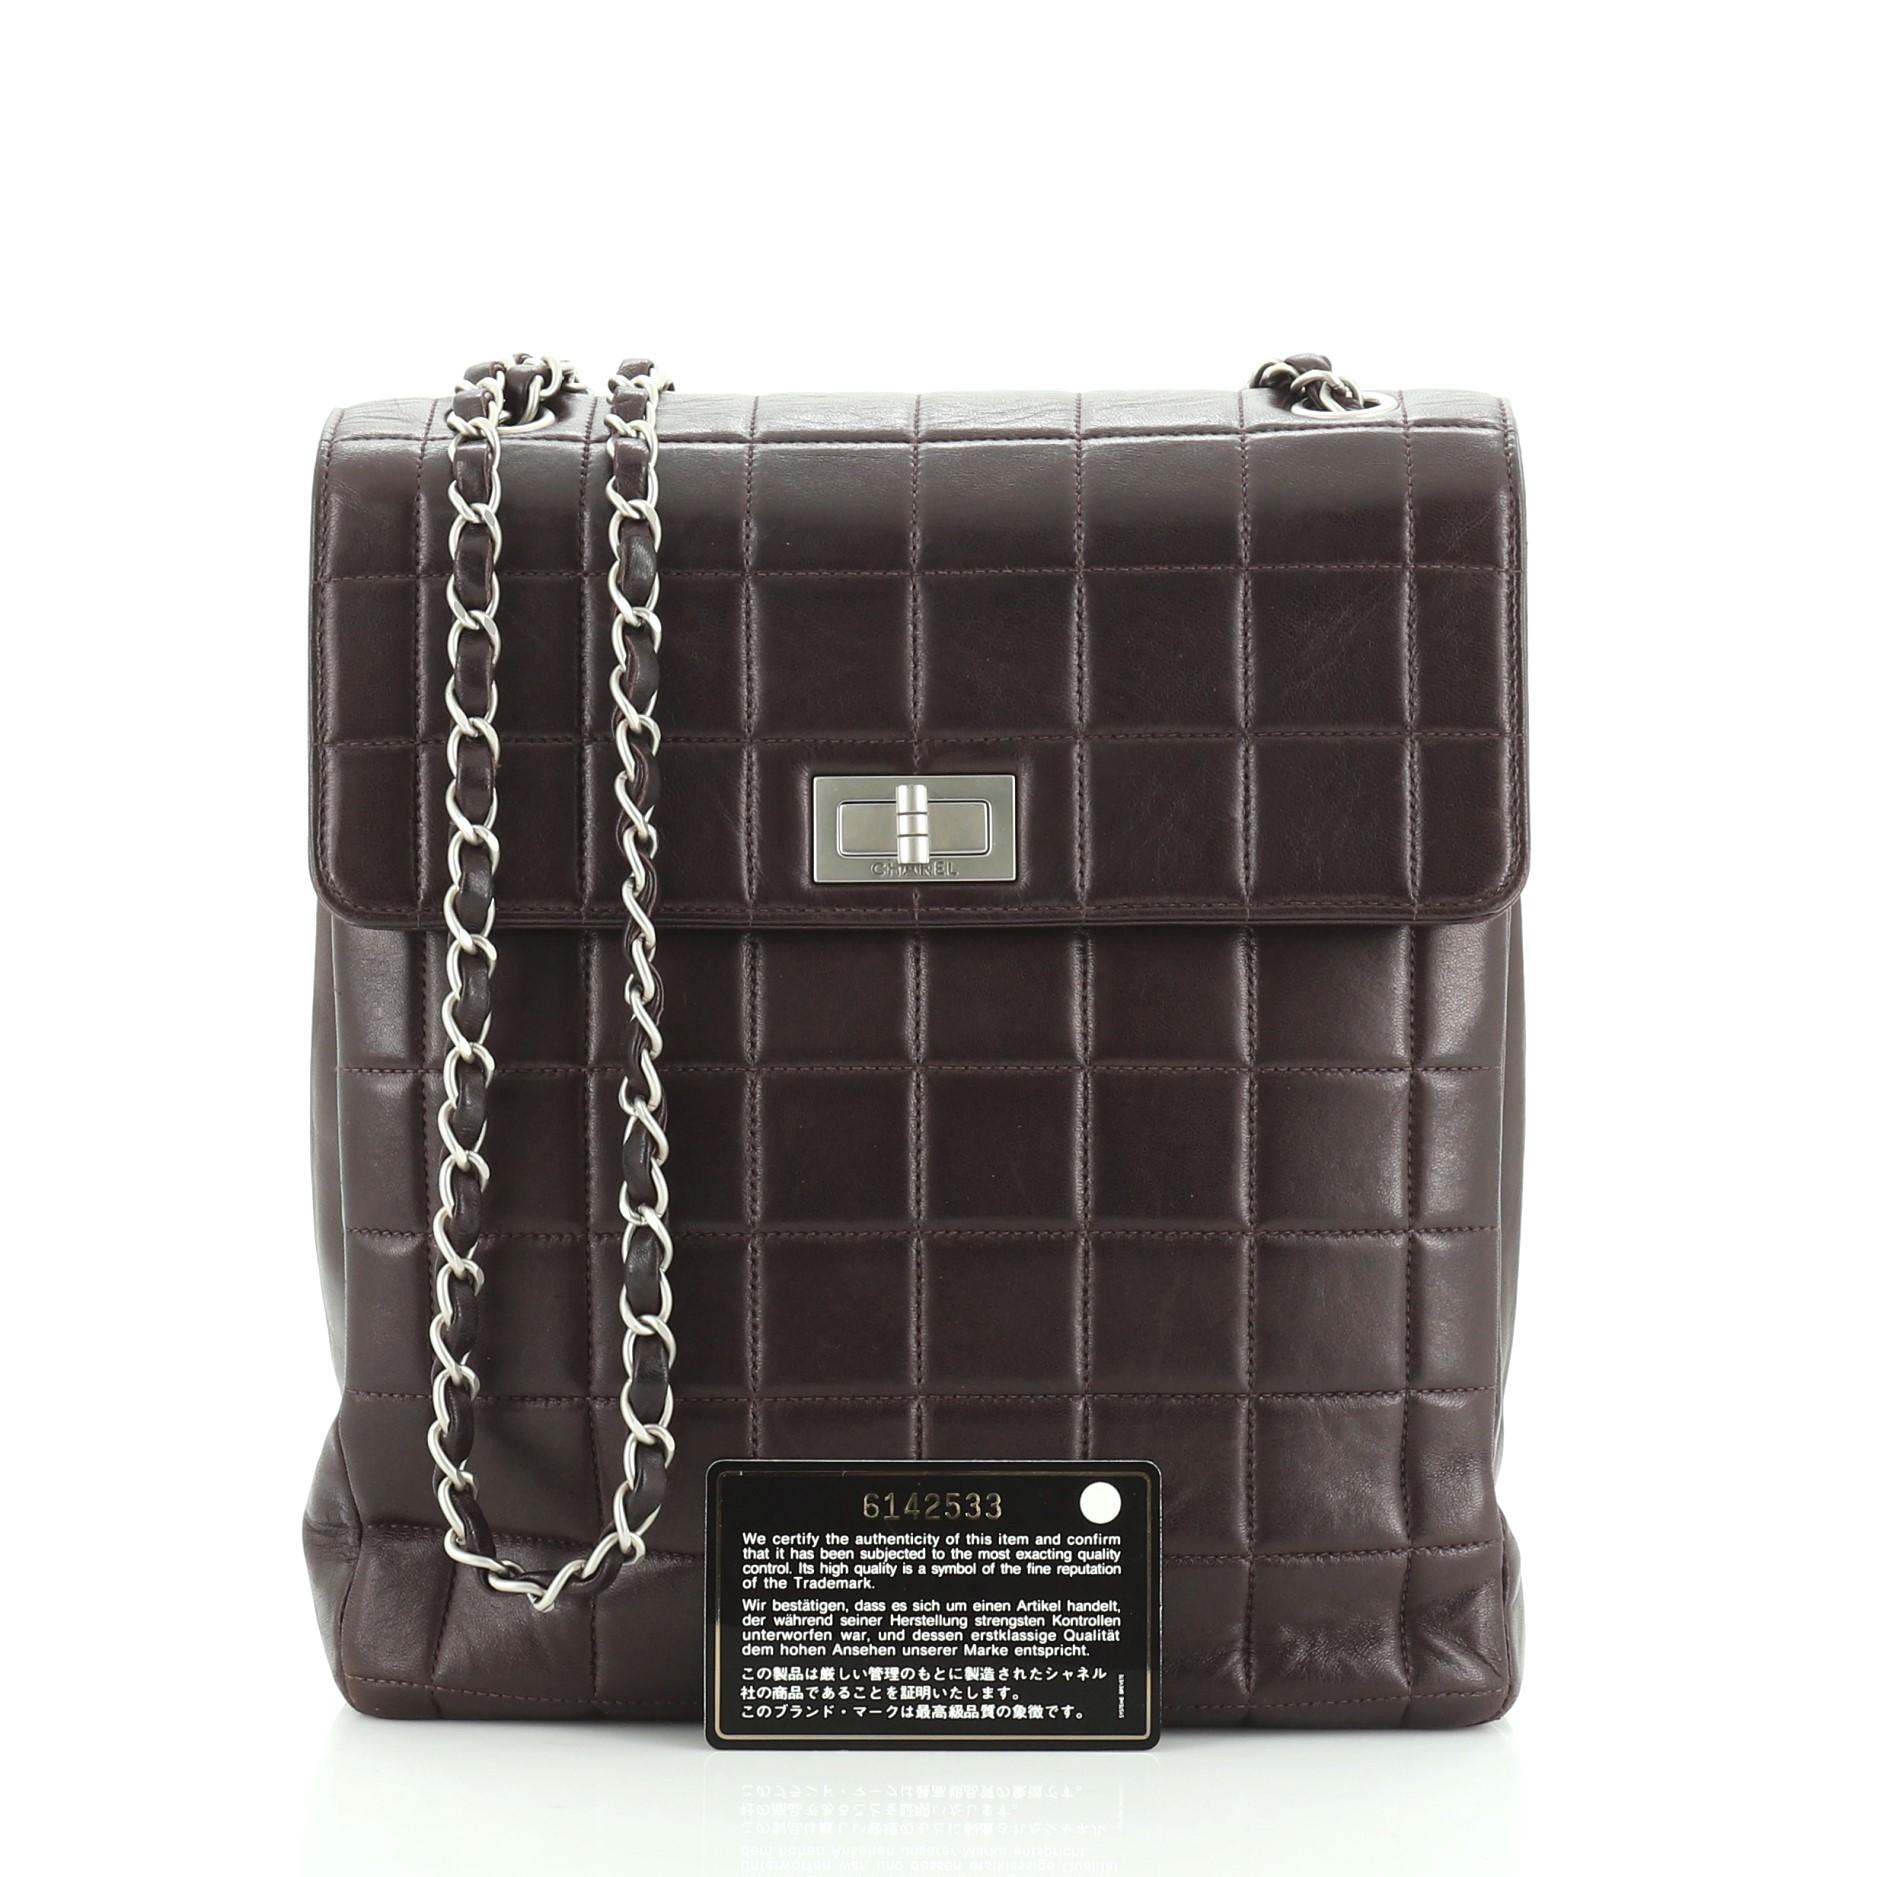 This Chanel Chocolate Bar Multipocket Flap Bag Quilted Leather Small, crafted from purple quilted leather, features woven-in leather chain strap, exterior pockets, and matte silver-tone hardware. Its mademoiselle turn-lock closure opens to a purple